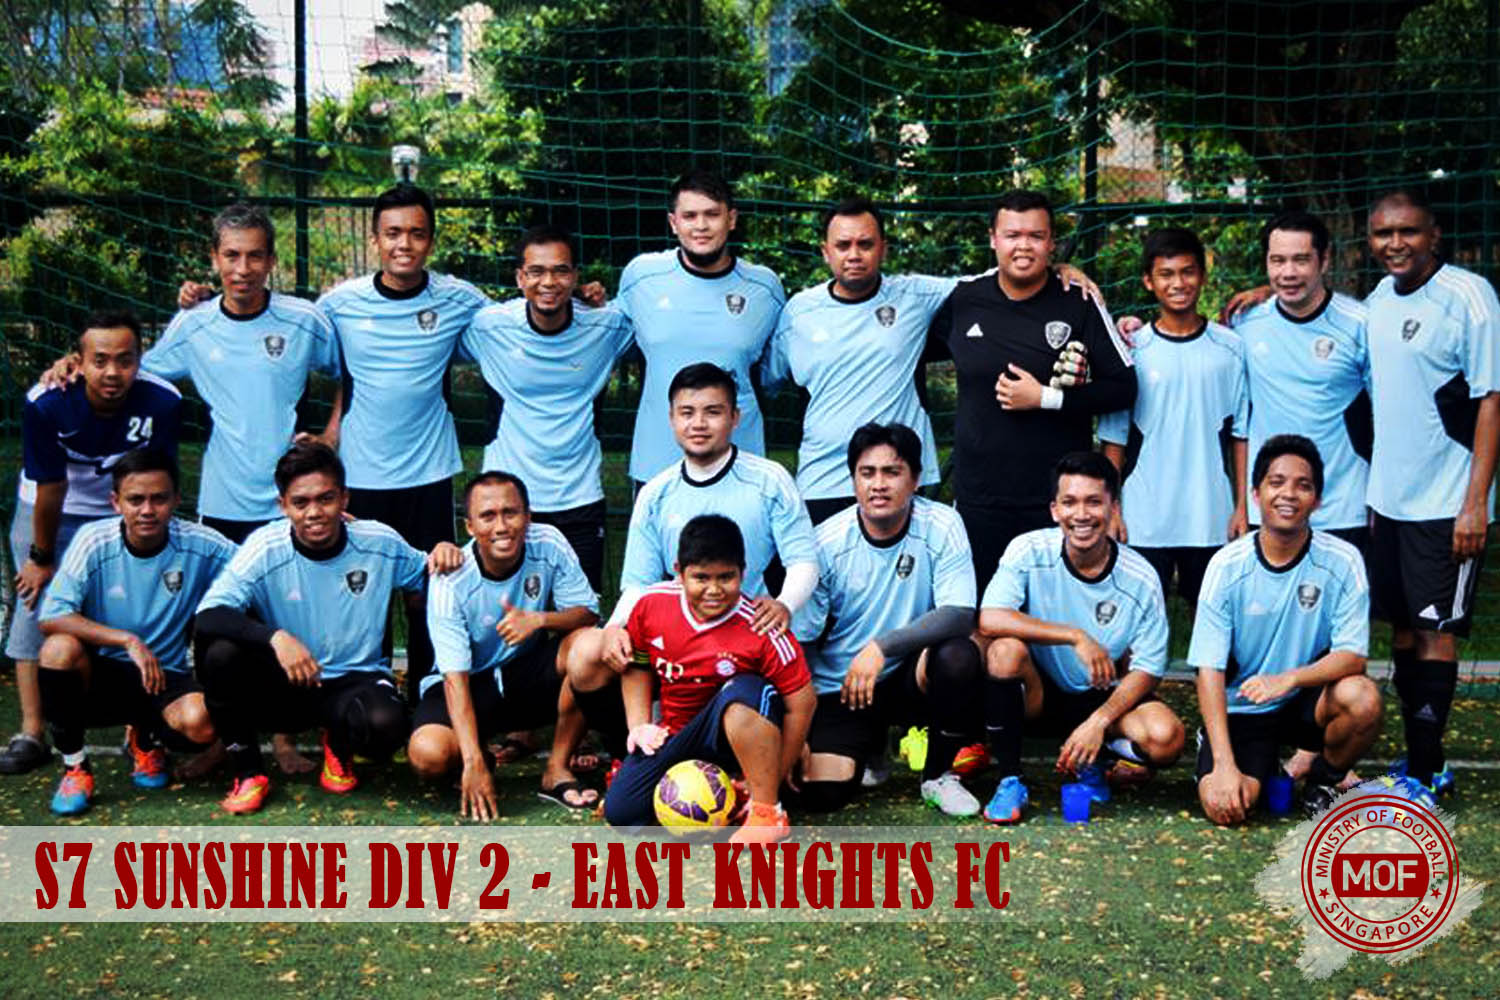 East Knights FC